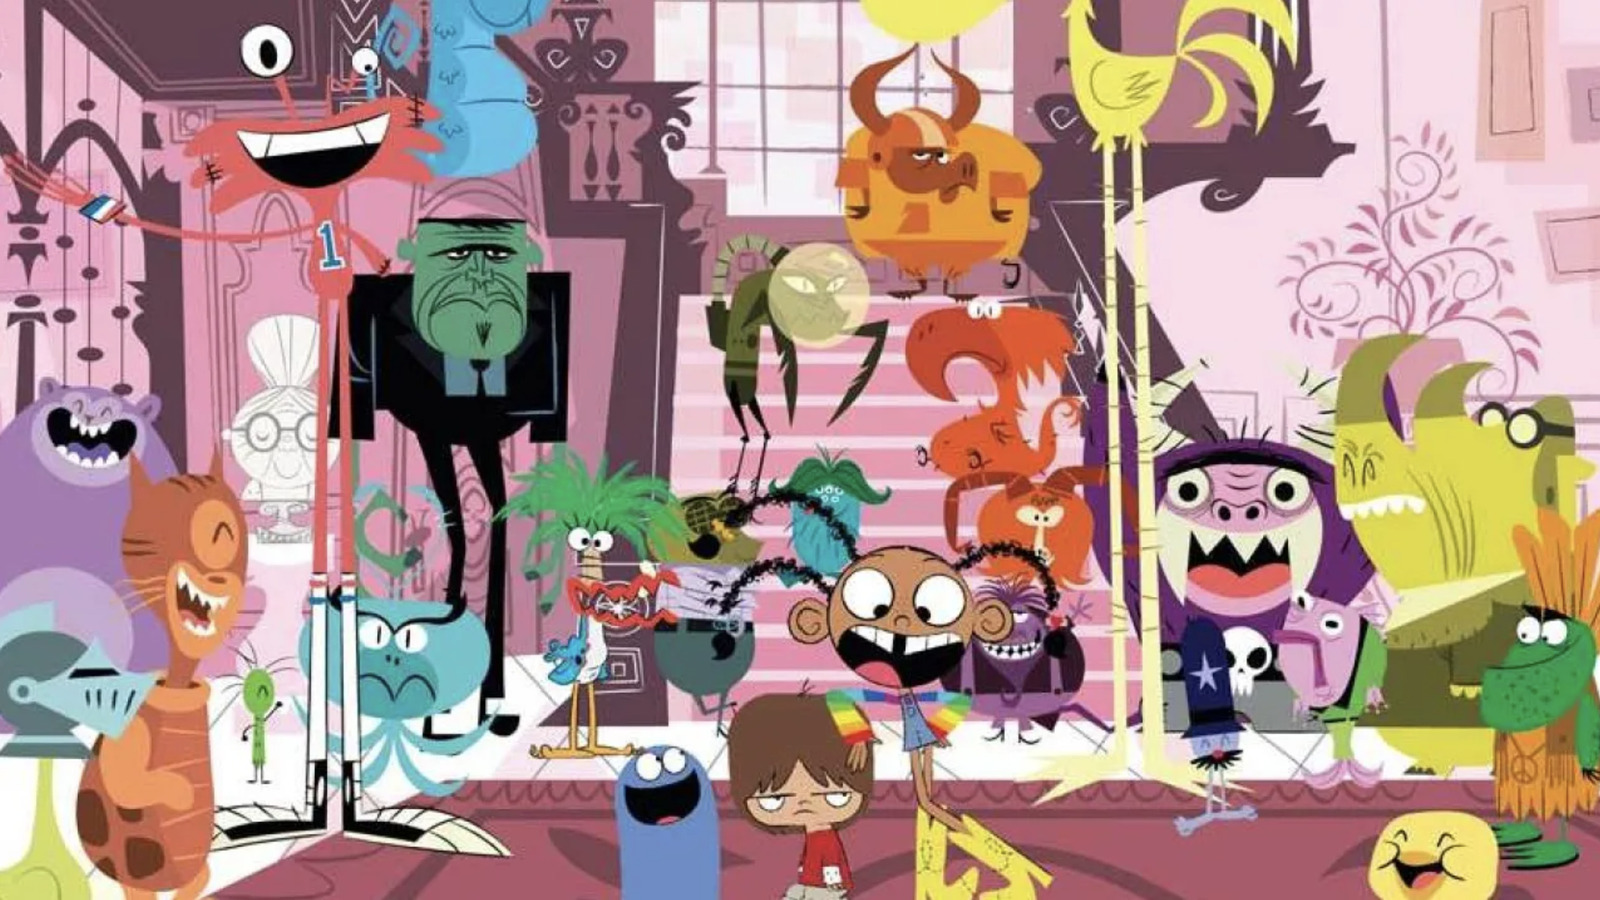 Fosters home of imaginary friends characters